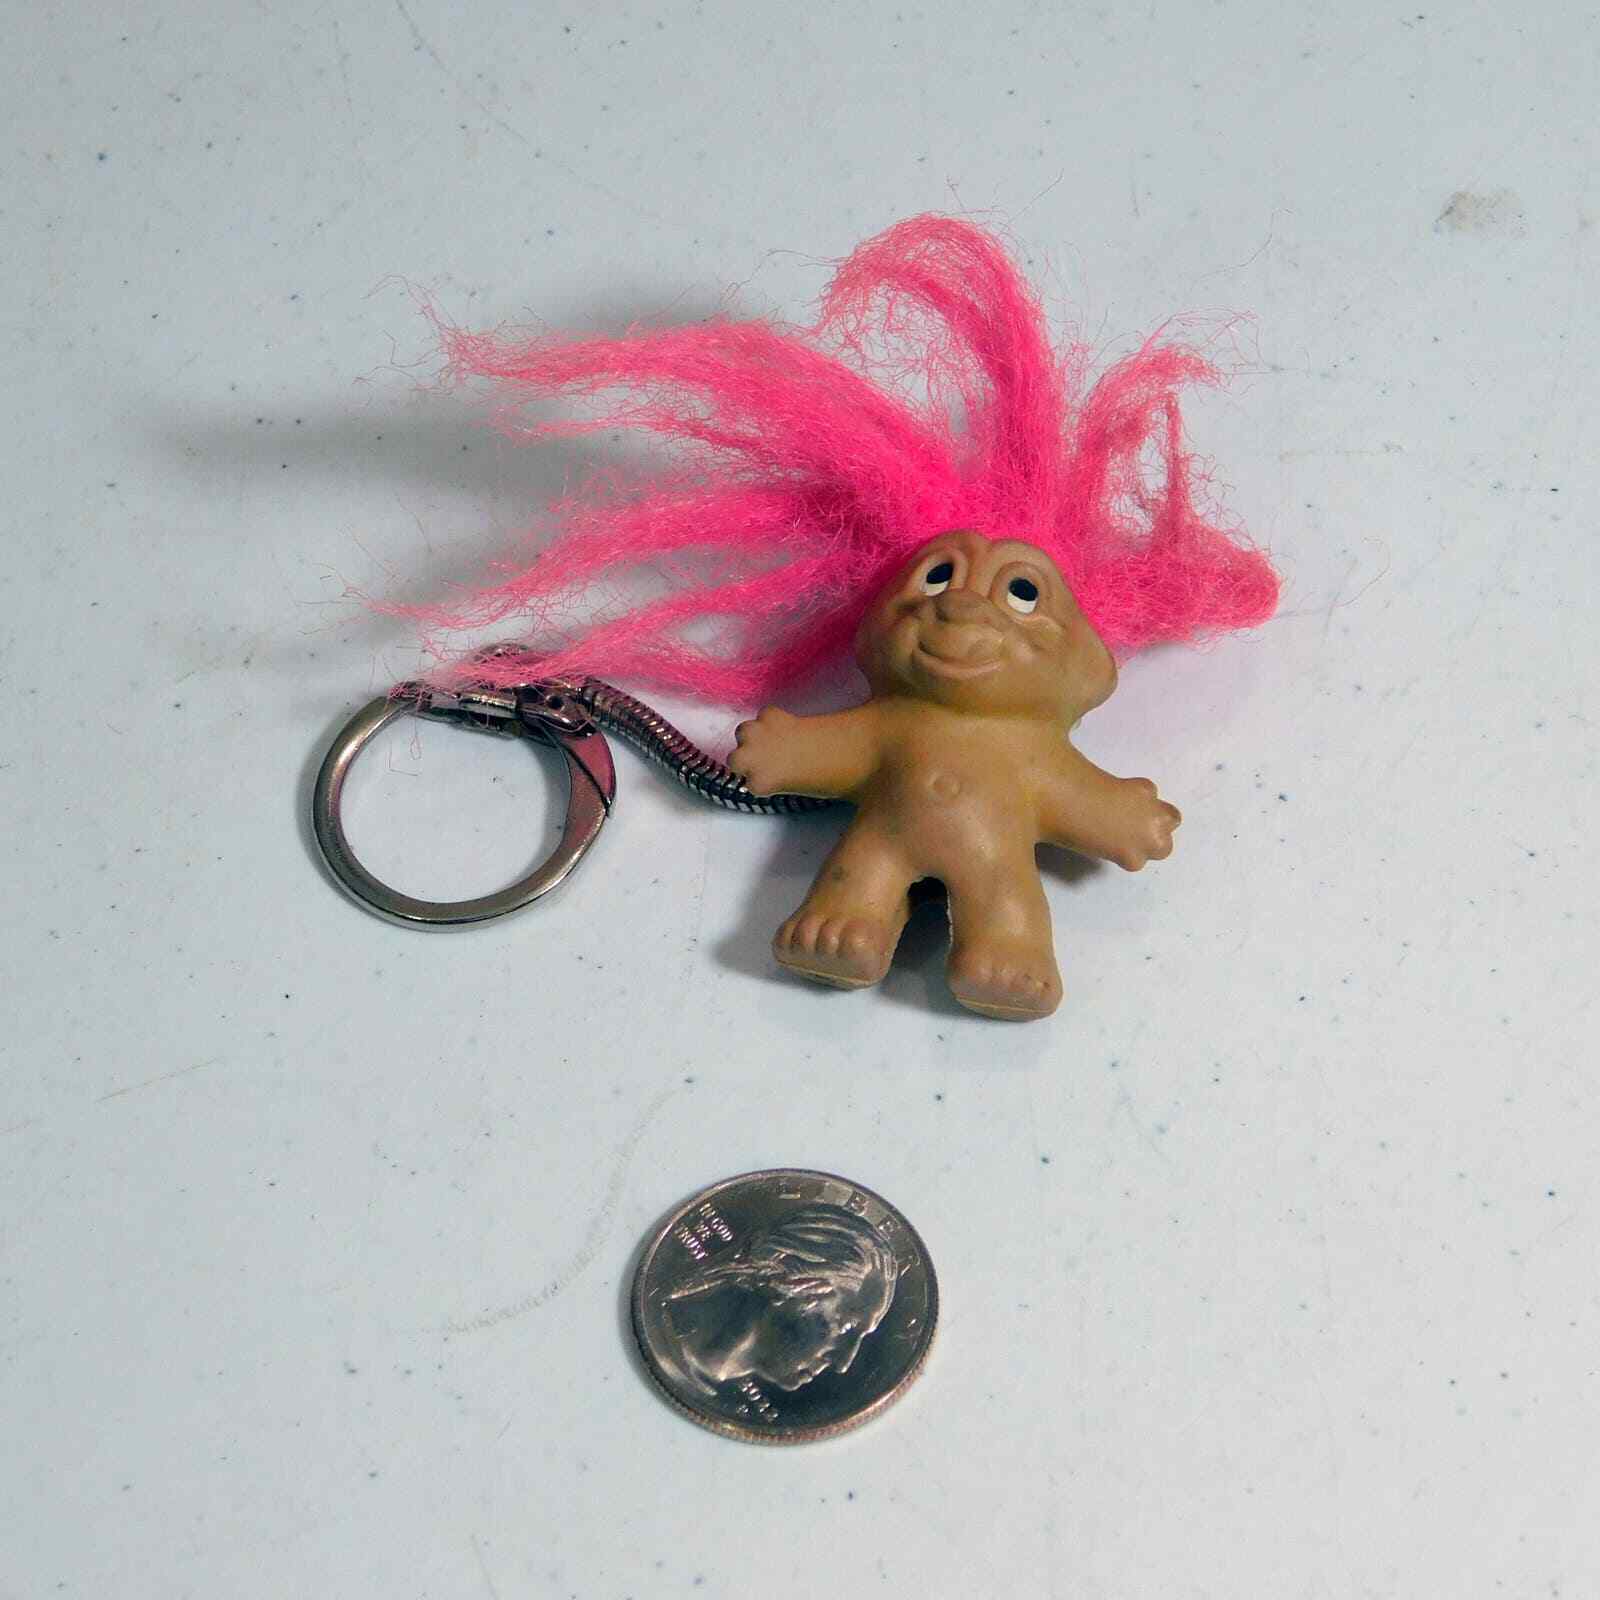 Vintage 80s Troll Doll Keychain Pink Hair 2 Inches Tall 1989